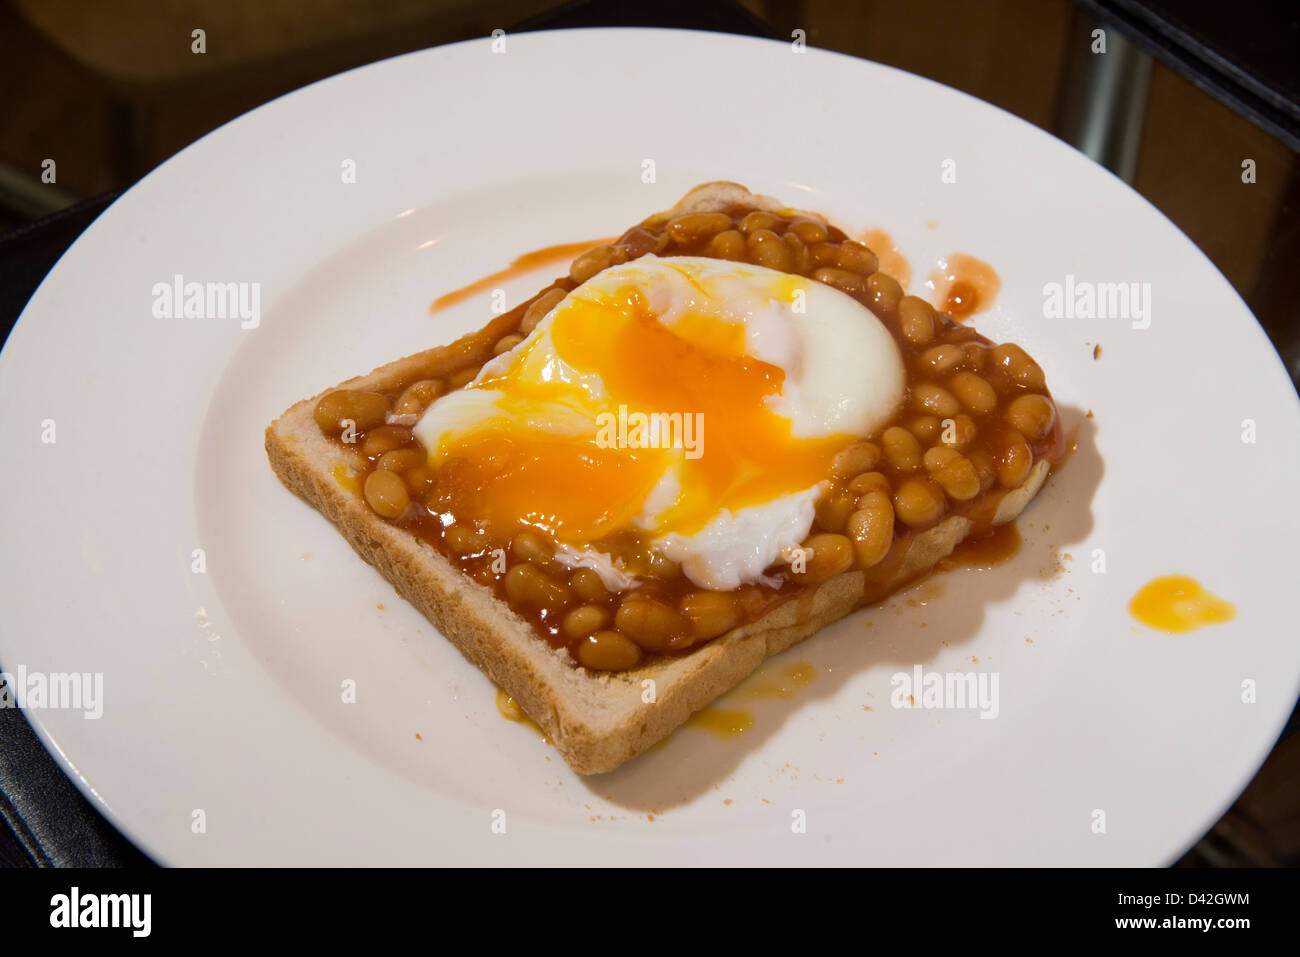 A plate of baked beans on toast with a poached egg on top Stock ...